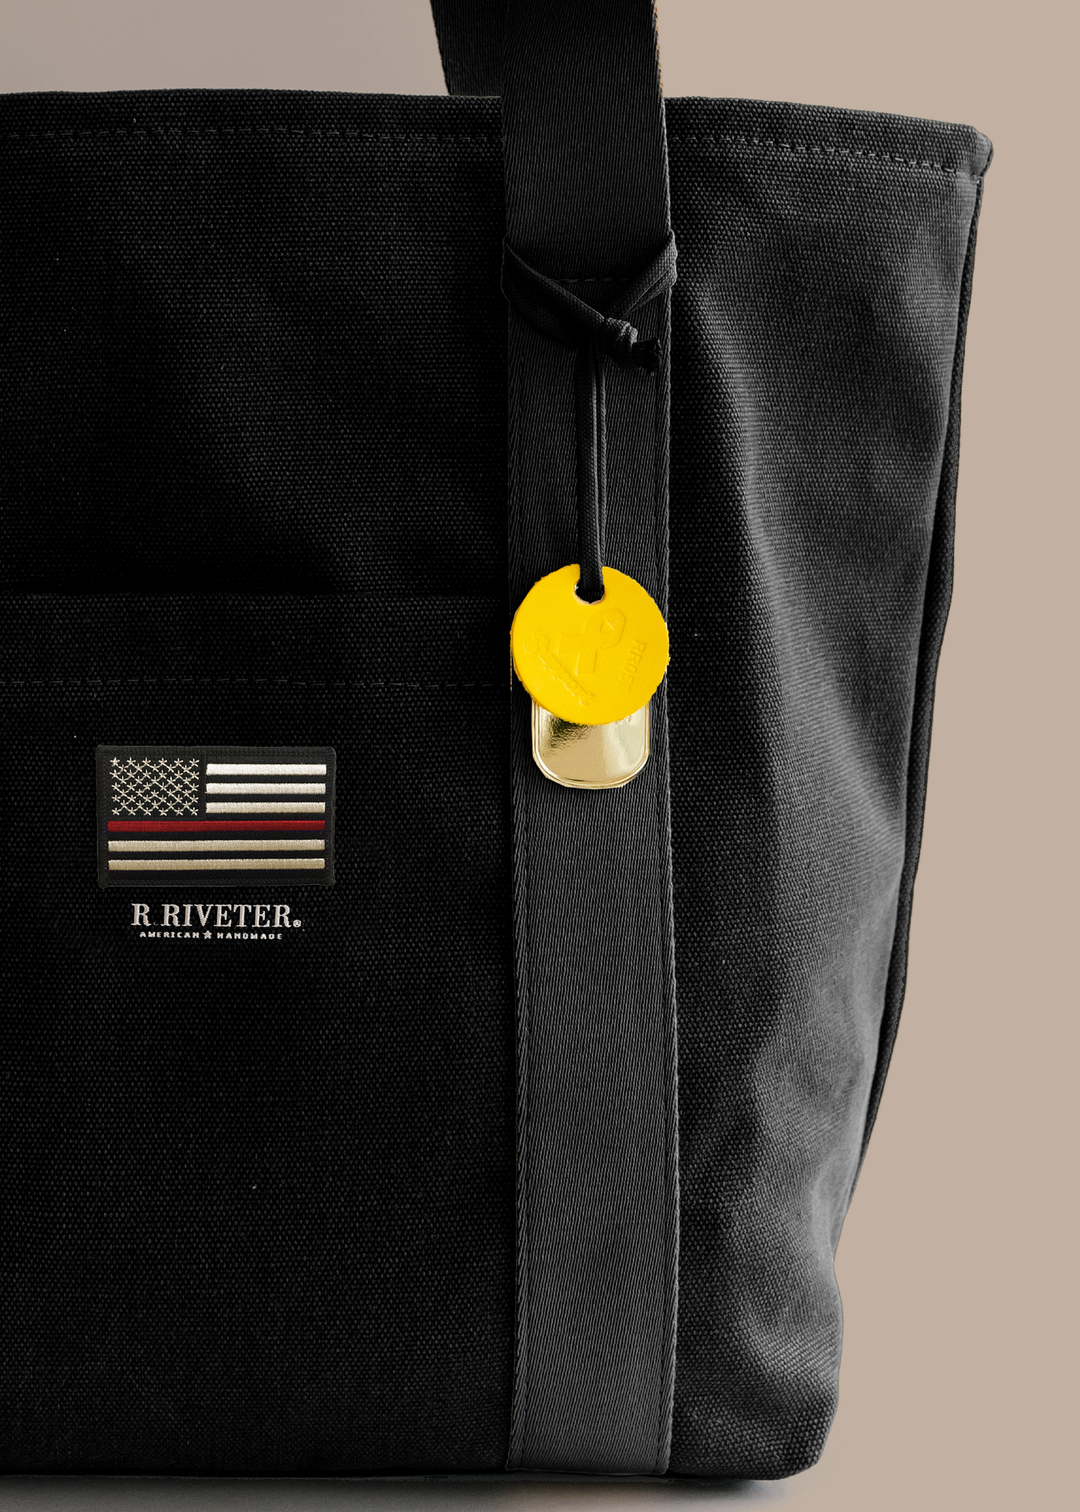 Margot | Special Edition Firefighter Black Canvas Tote